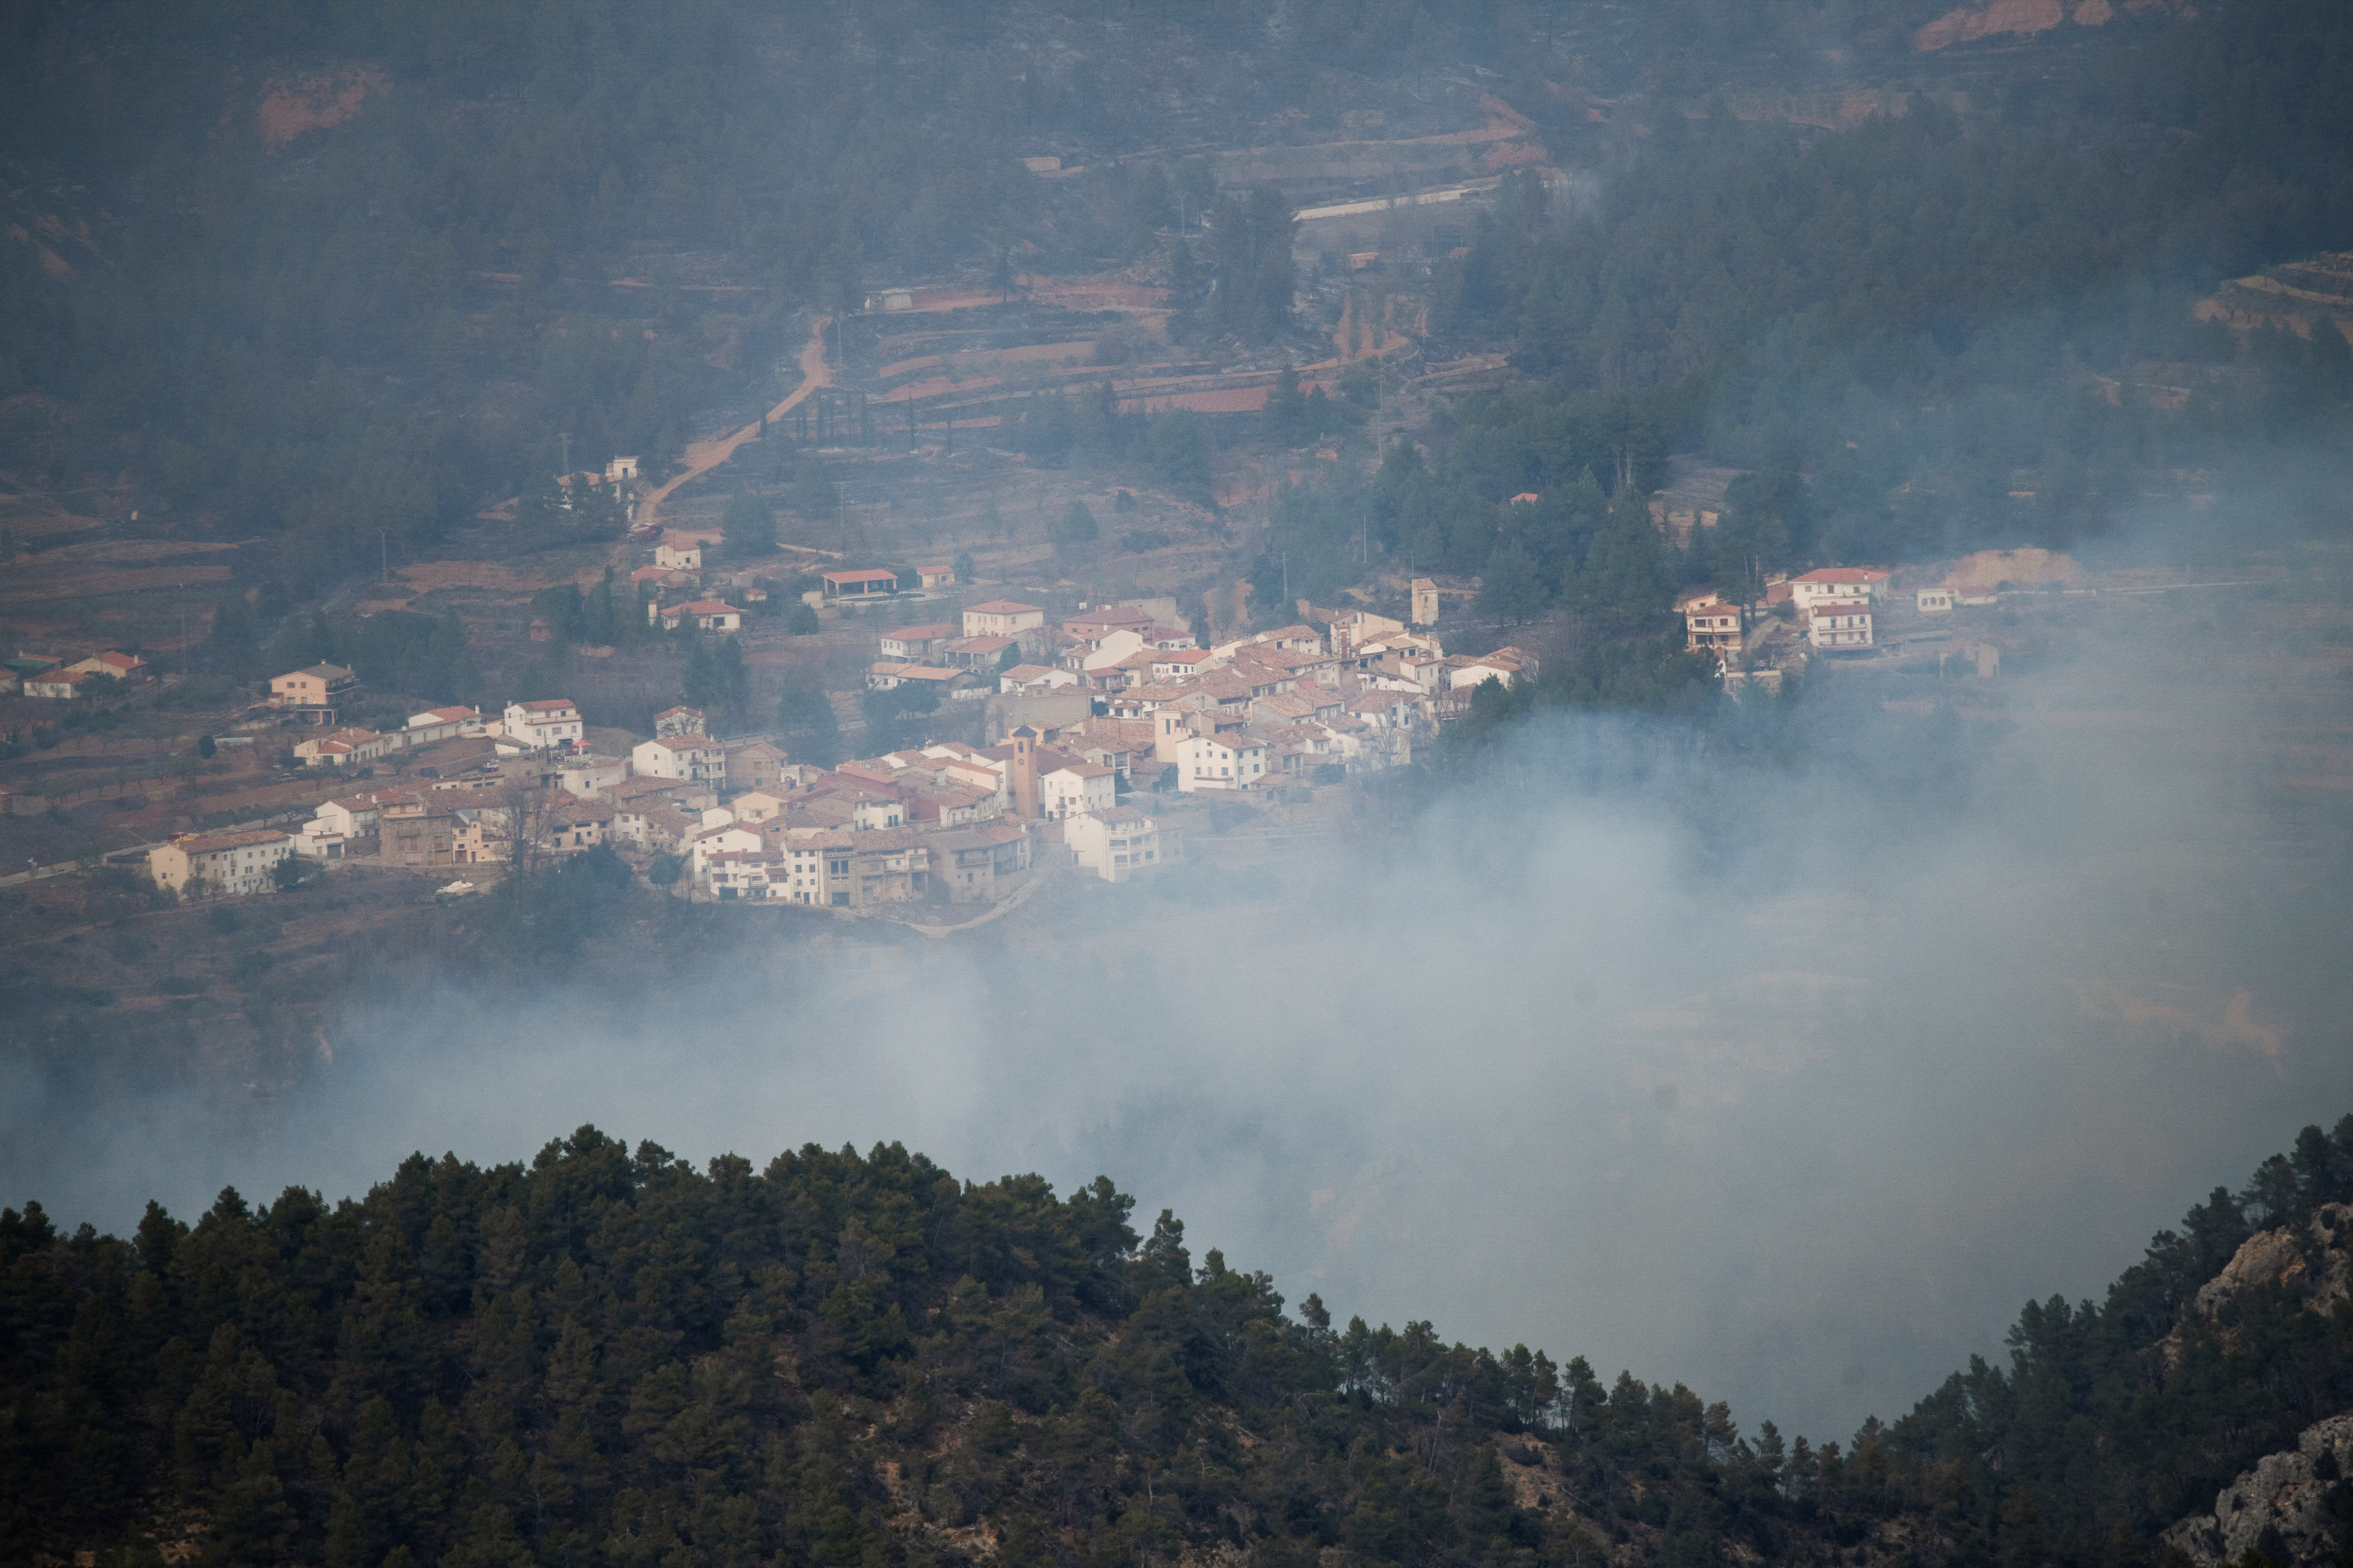 Smoke rises during a wildfire in Los Calpes